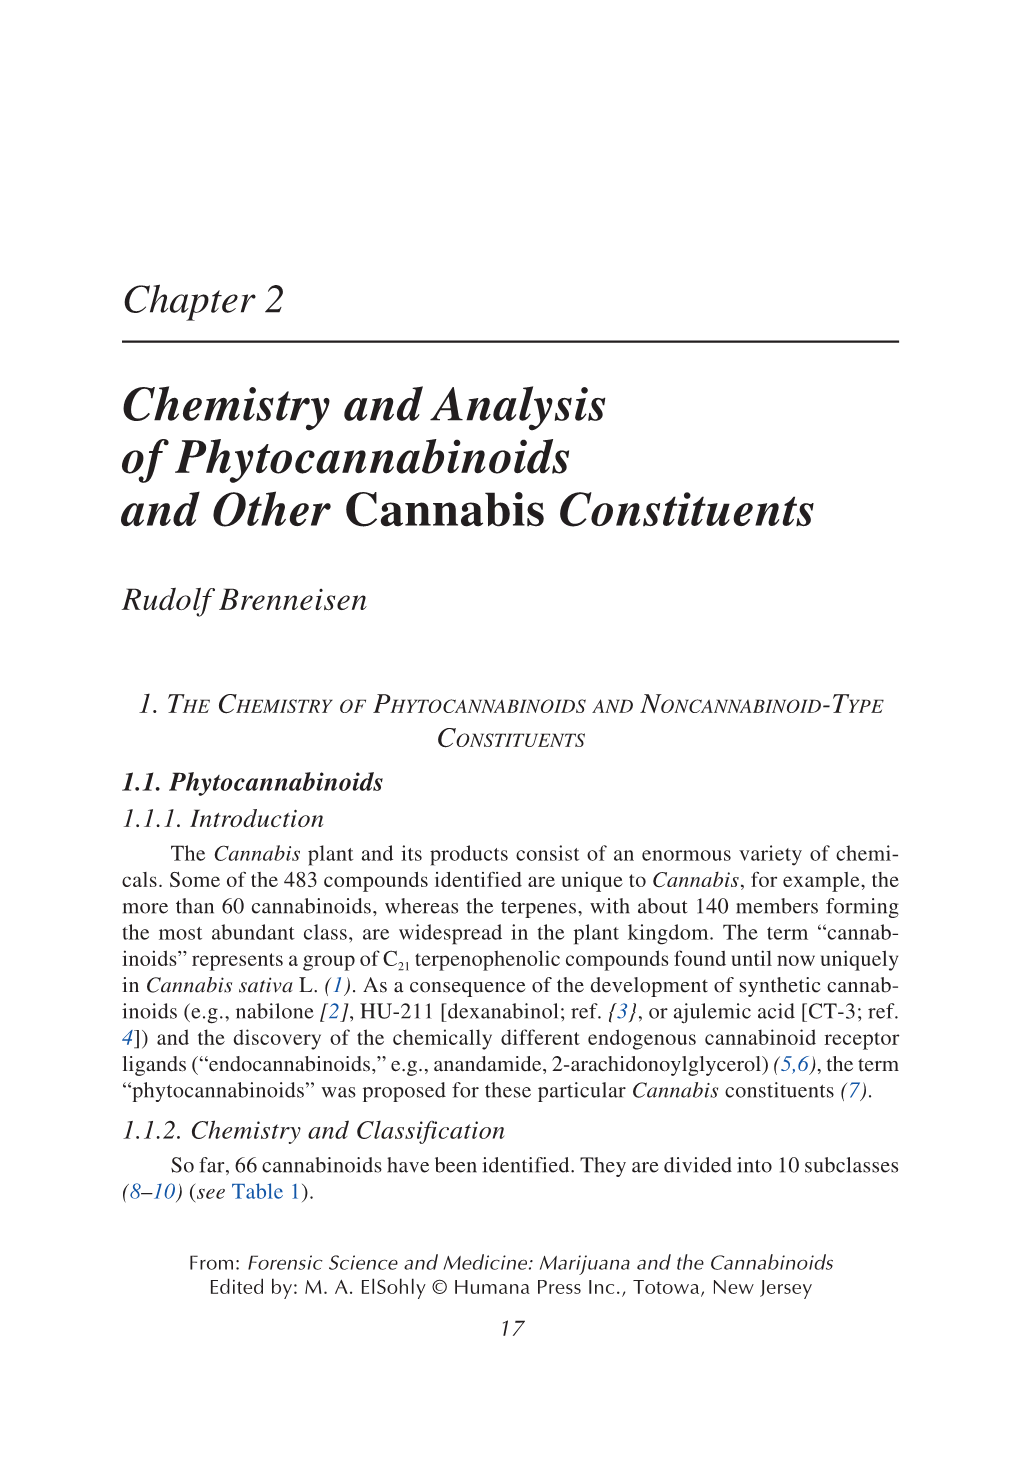 Chemistry and Analysis of Phytocannabinoids and Other Cannabis Constituents